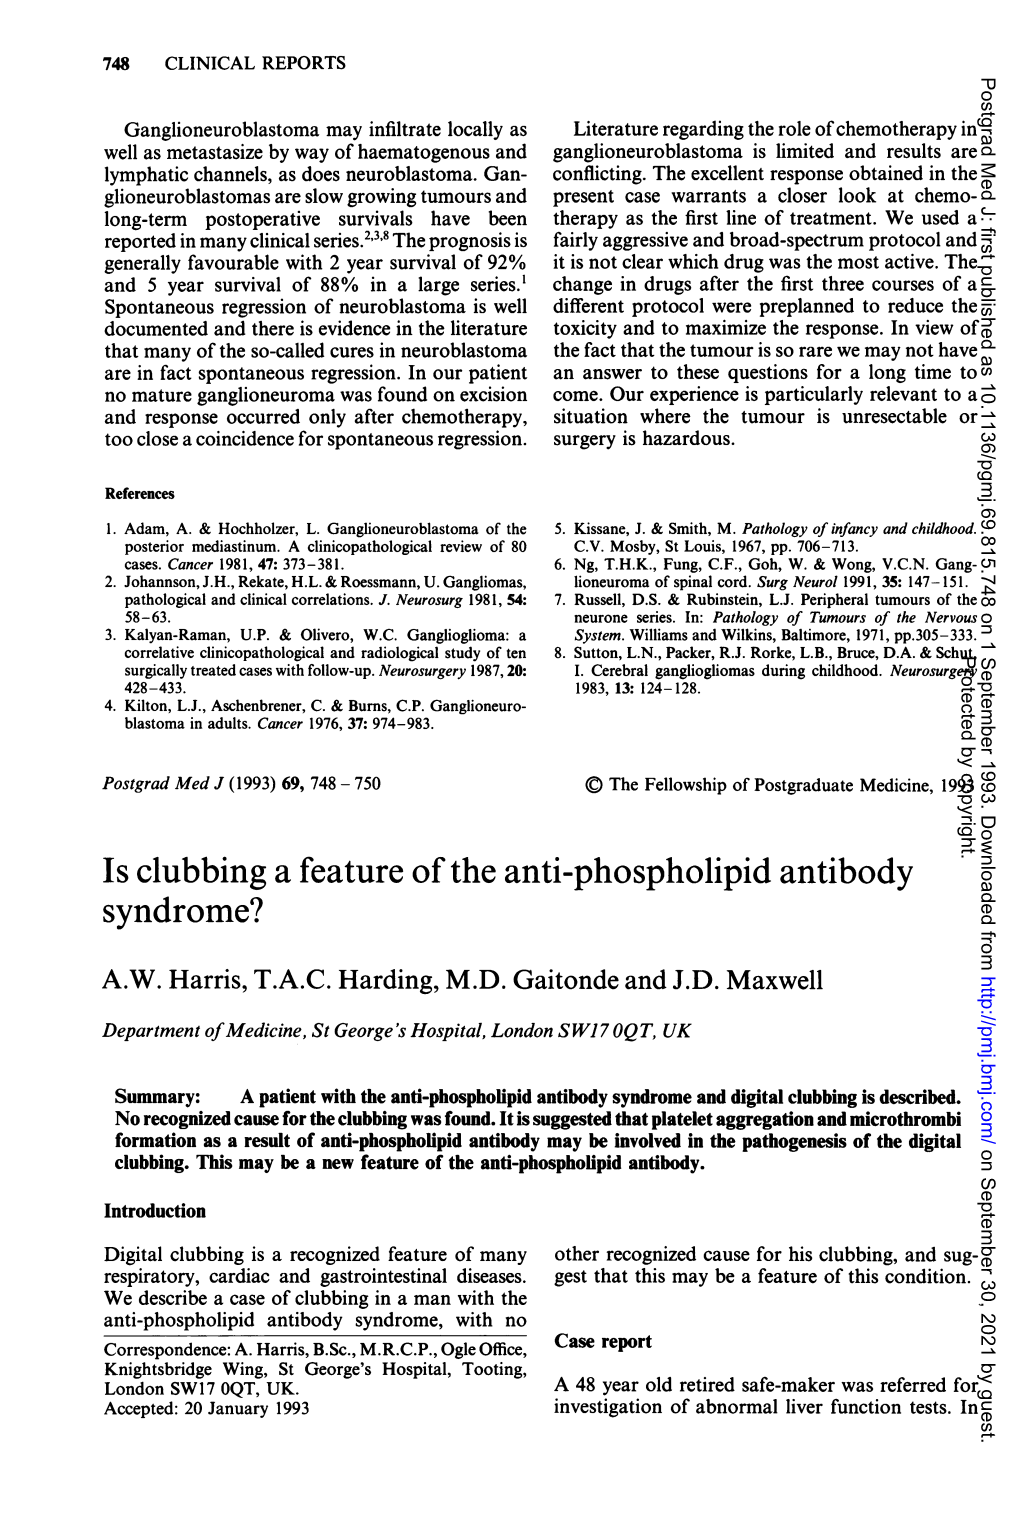 Is Clubbing a Feature of the Anti-Phospholipid Antibody